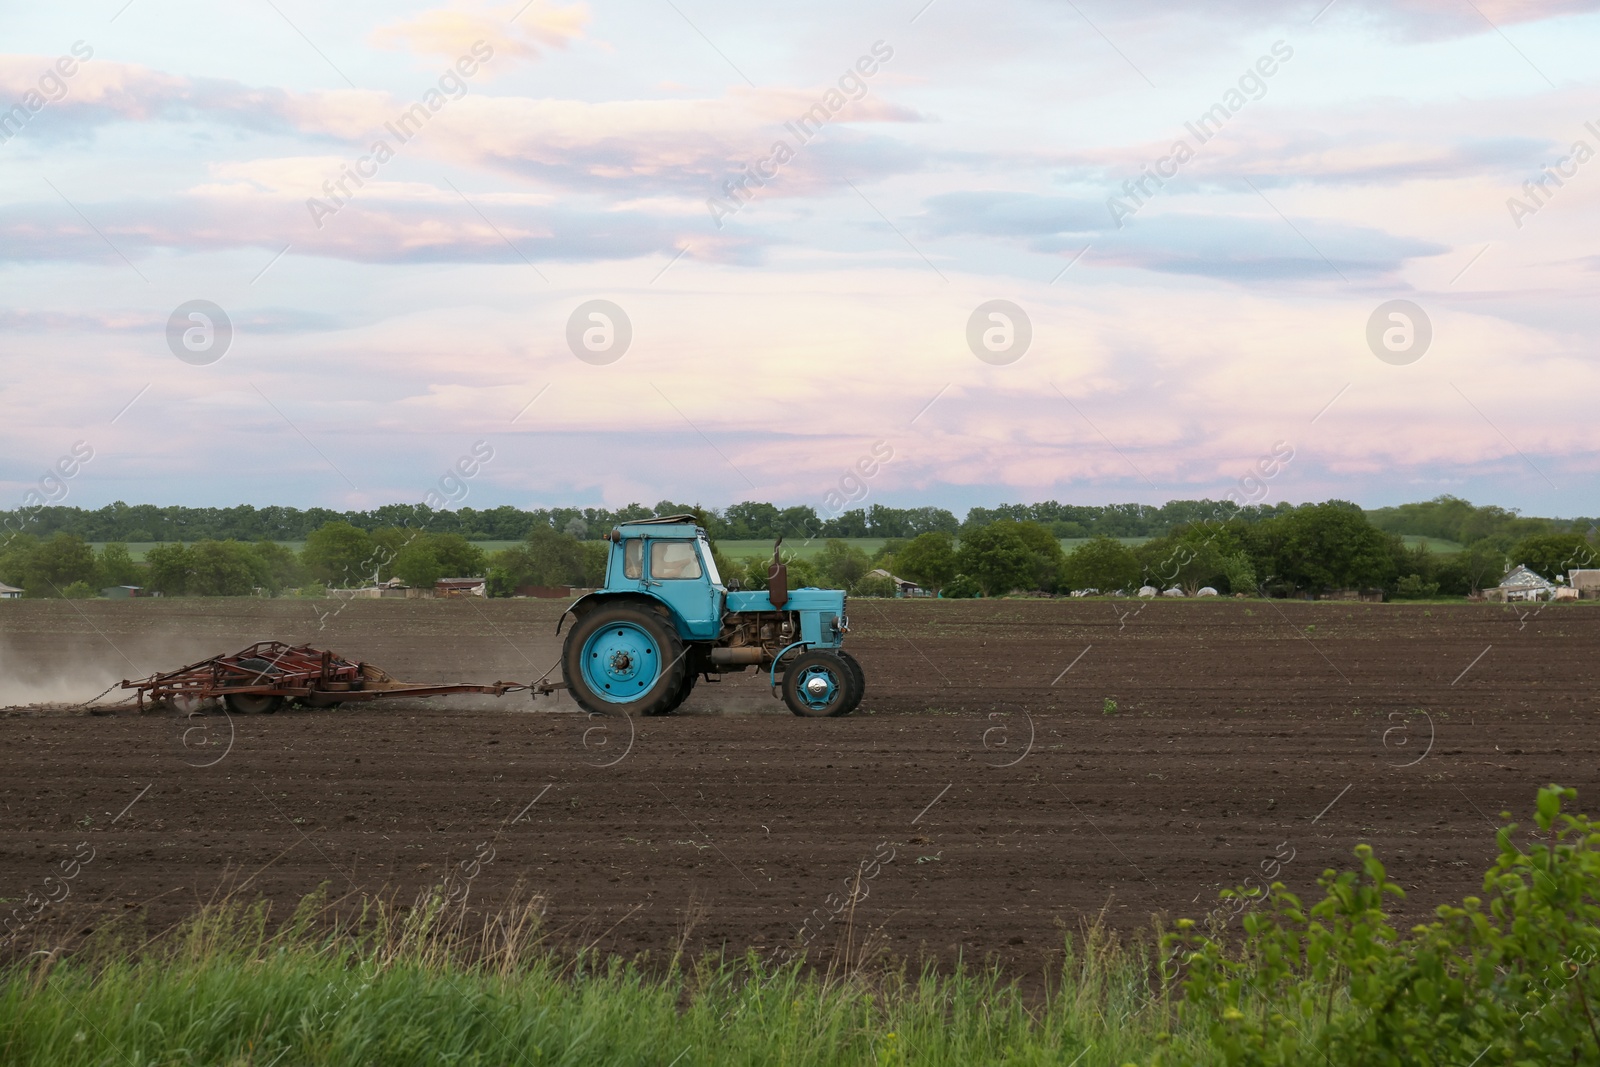 Photo of Tractor plowing agricultural field under cloudy sky